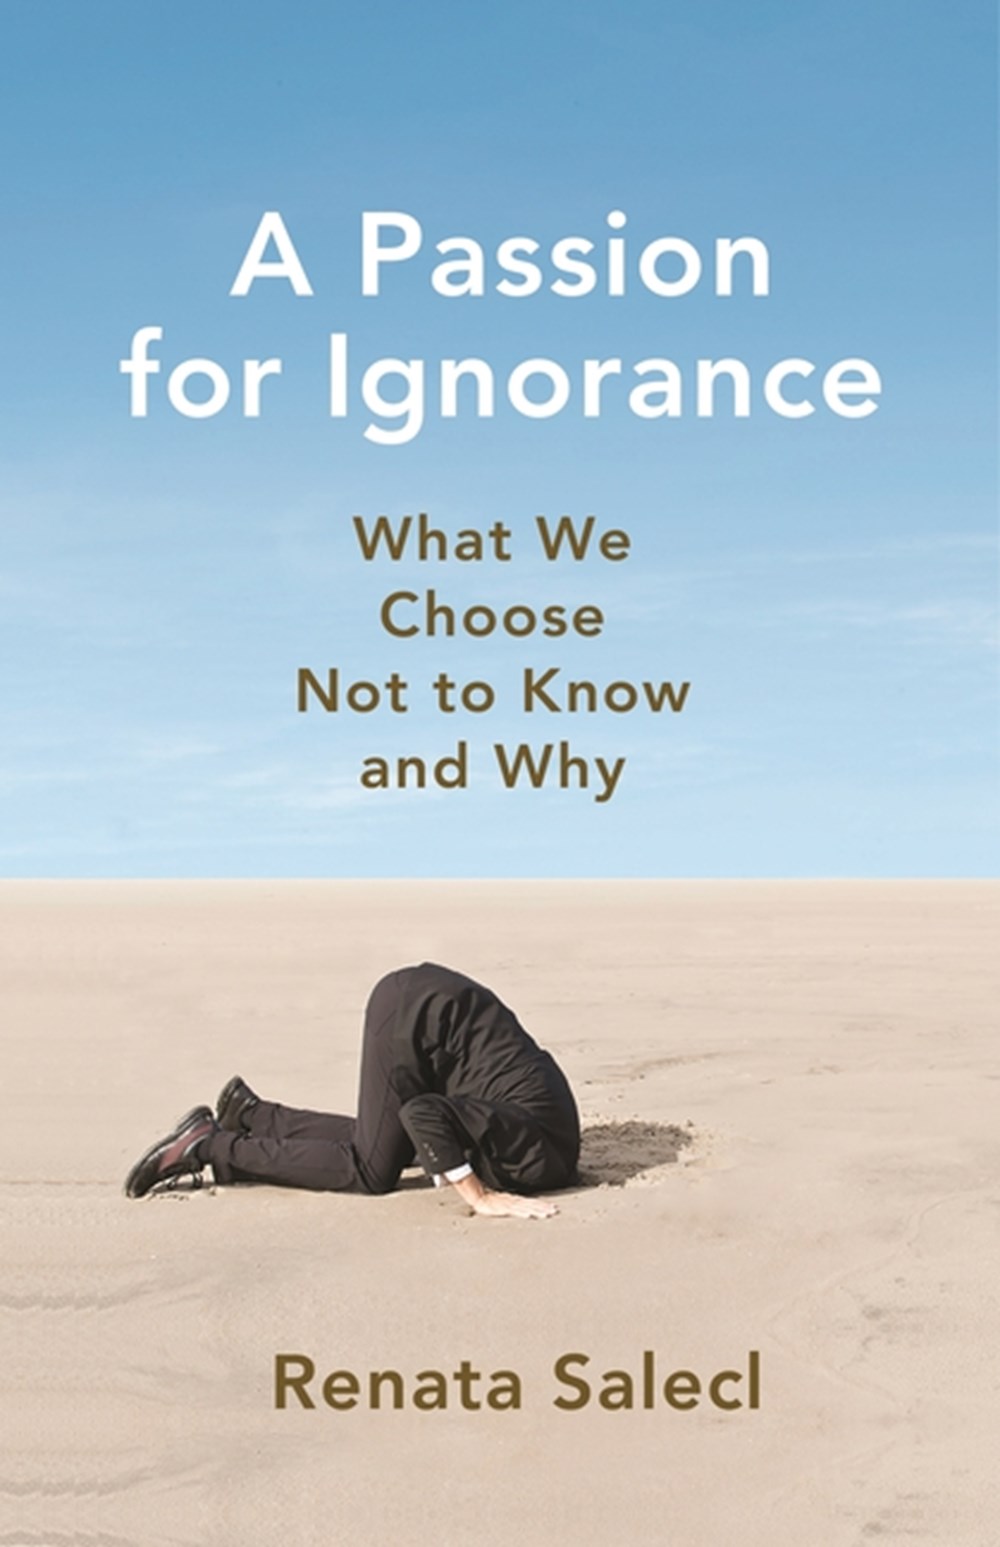 Passion for Ignorance: What We Choose Not to Know and Why